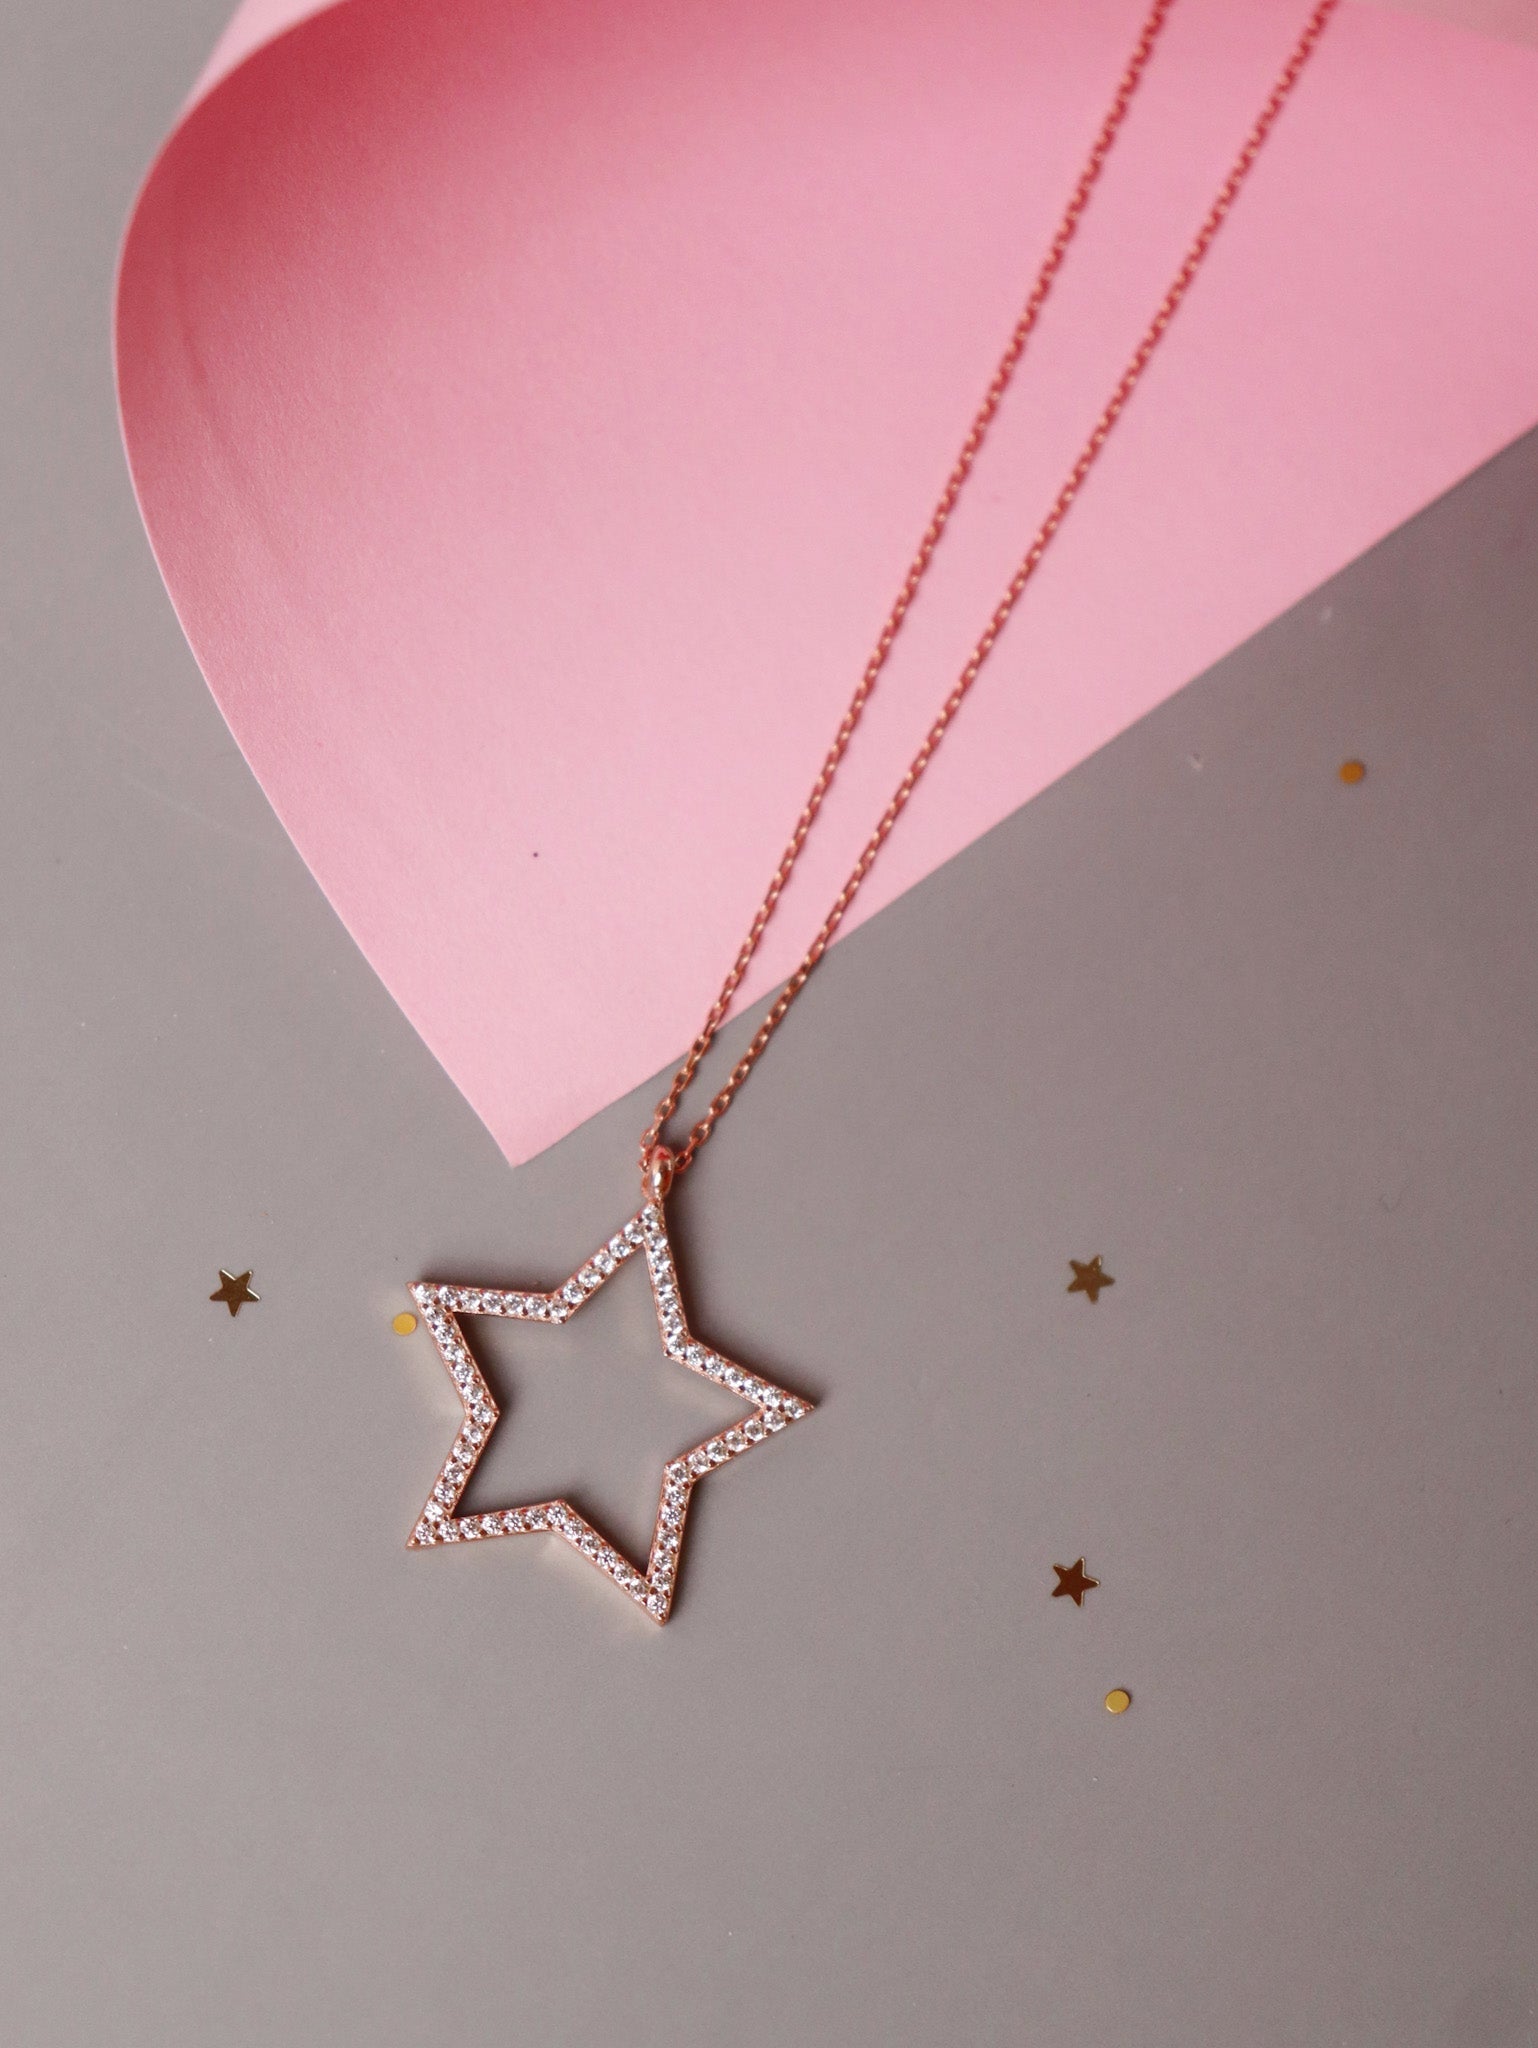 Dainty Red Star Necklace, Tiny Star Pendant Necklace Gold, Small Star  Charm, Enamel Pendant, White Star, Yellow Star, Blue Star, Pink Star - Etsy  | Dream jewelry, Star jewelry, Cute jewelry